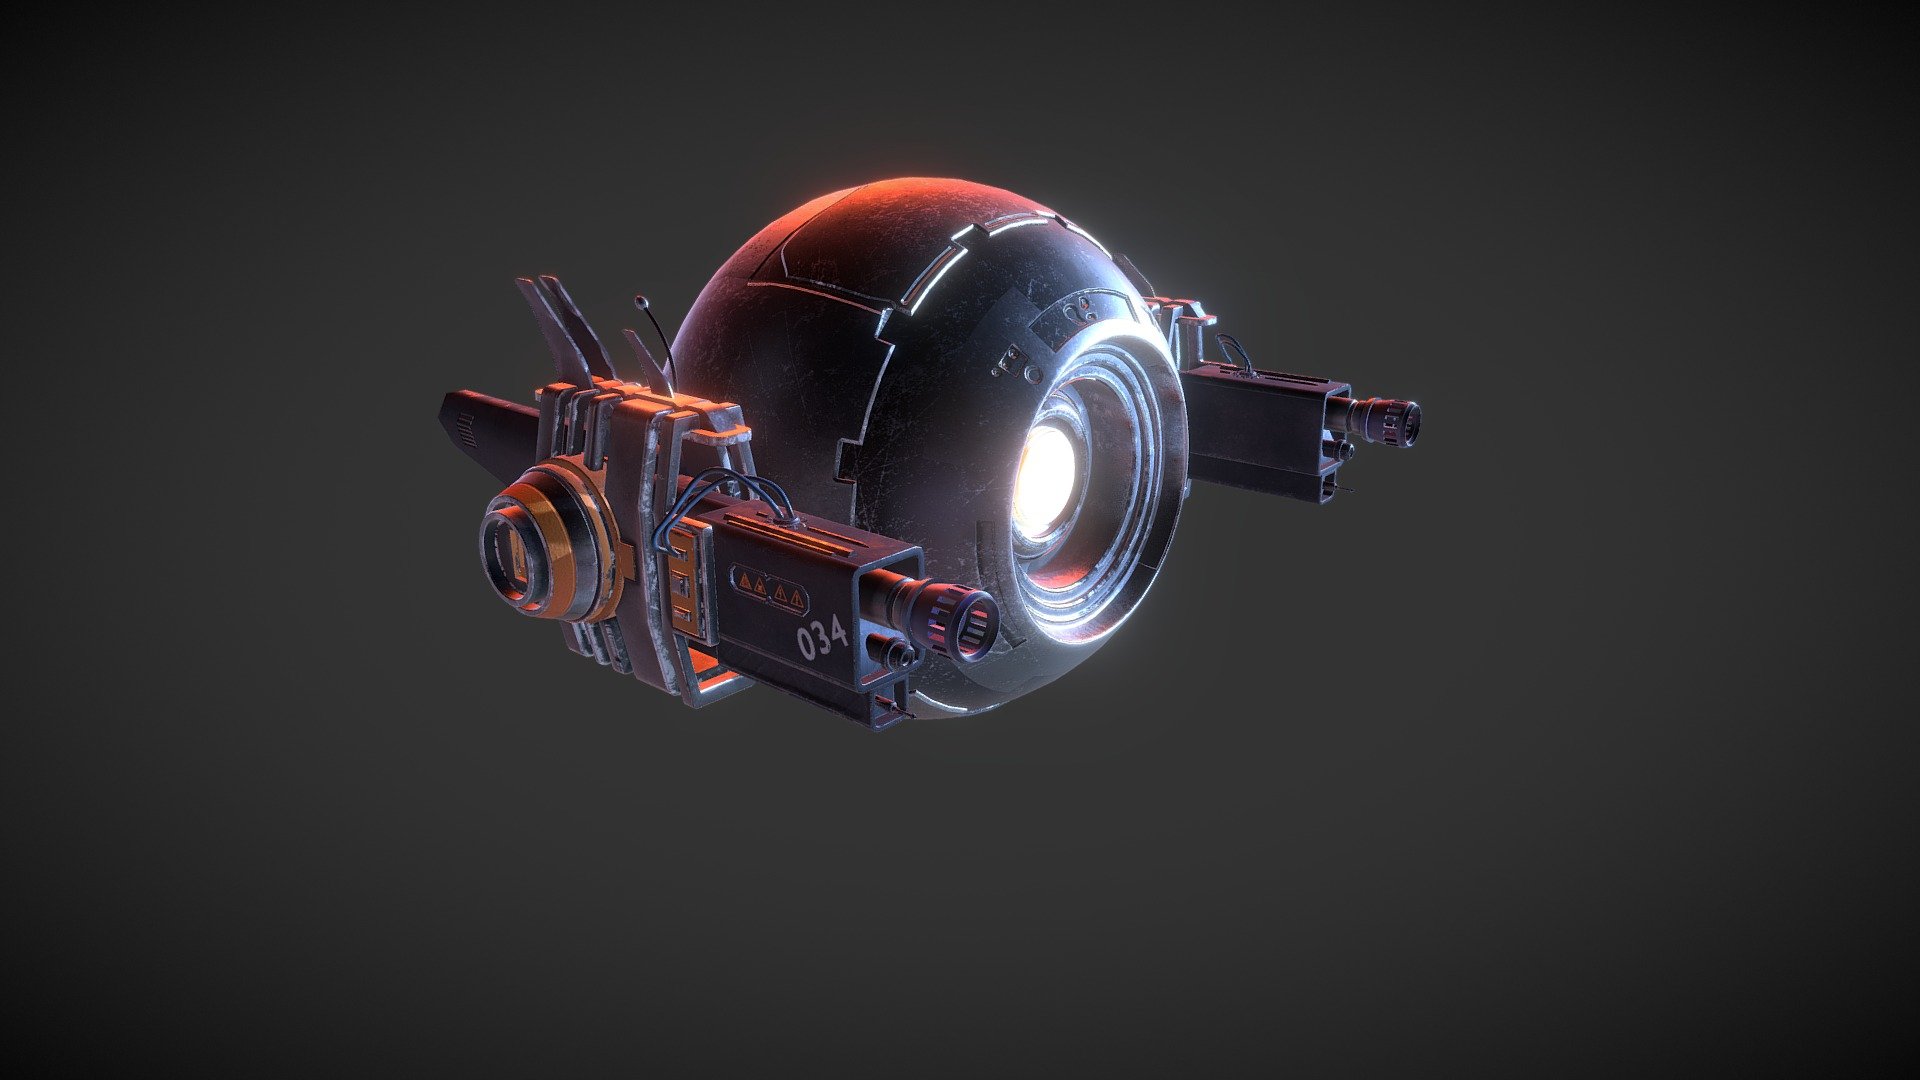 This is a personal project to pass the time ! One hour of modeling
and 20 minutes of texturing.

Modeling: Cinema4D

Texturing: Substance painter - Drone futuriste - Download Free 3D model by peterwolf 3d model